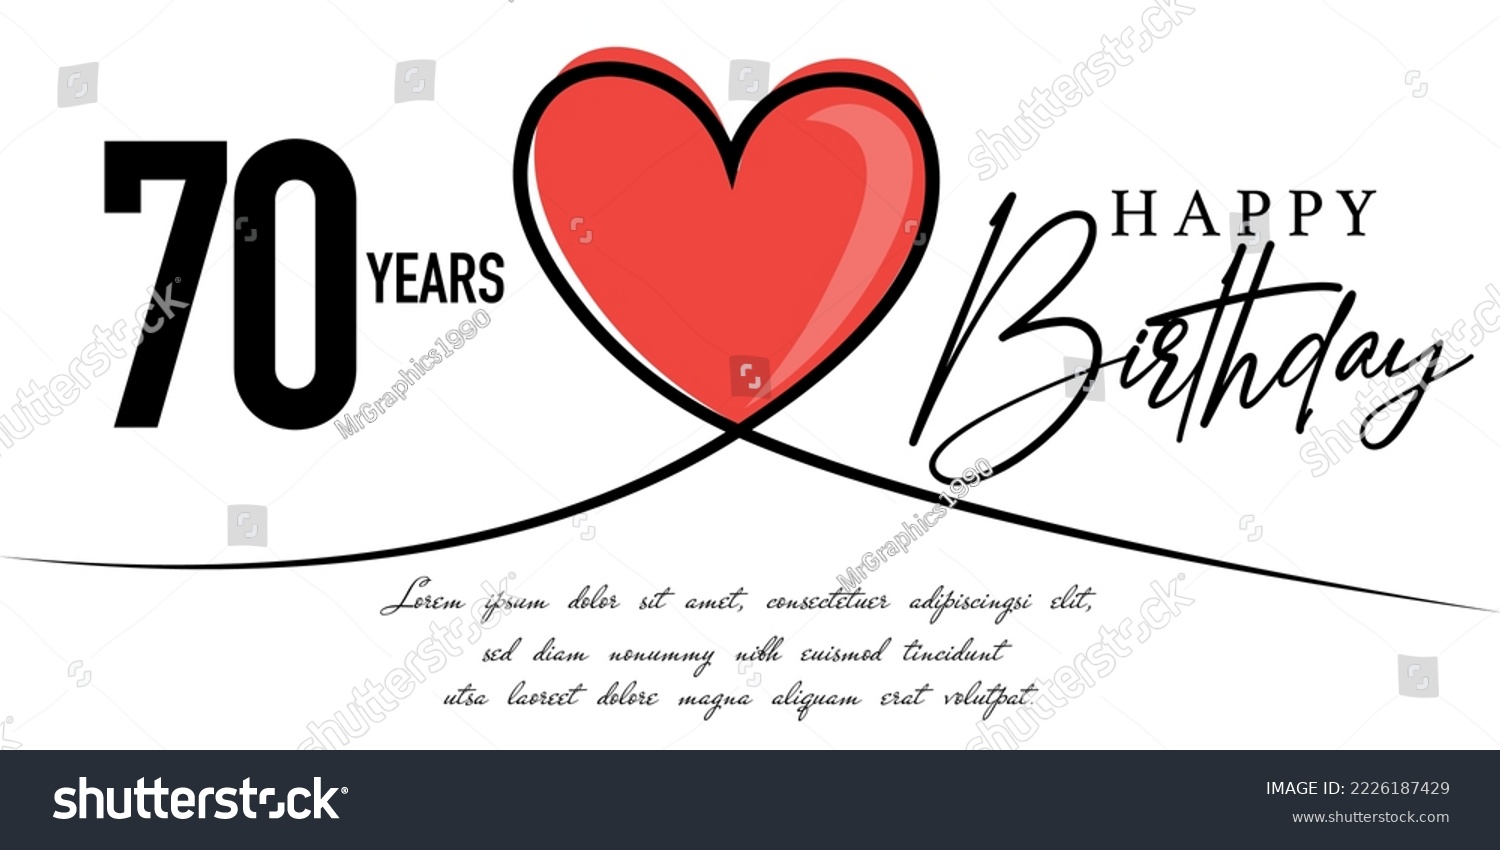 SVG of Happy 70th birthday card vector template with lovely heart shape.
 svg